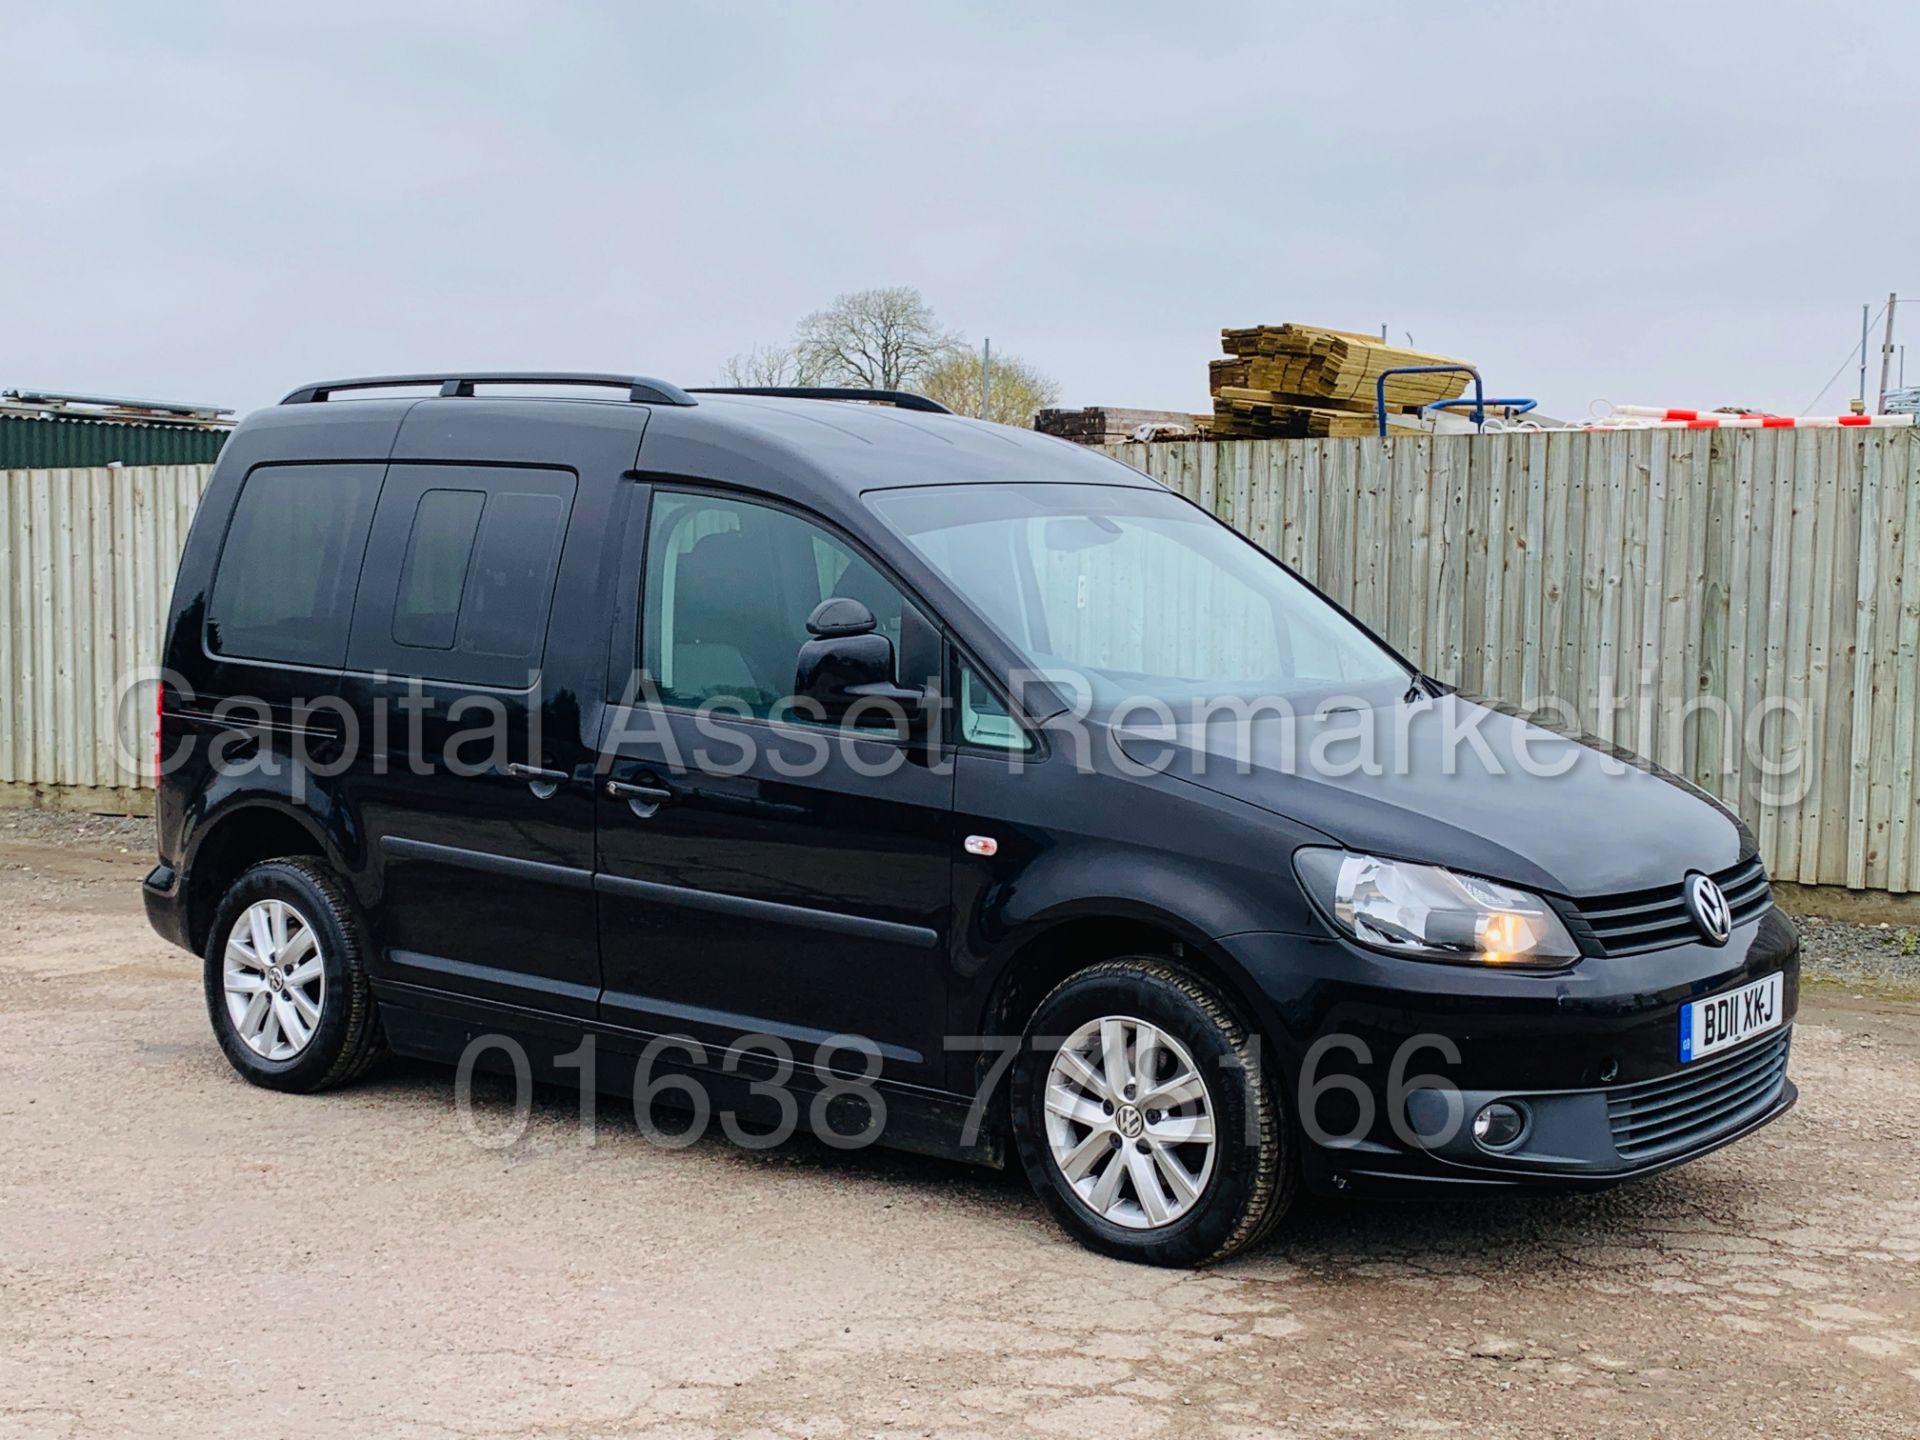 VOLKSWAGEN CADDY C20 *LIFE* DISABILITY ACCESS /WAV (2011) '1.6 TDI - AUTO' *A/C* (35,000 MILES ONLY) - Image 11 of 41